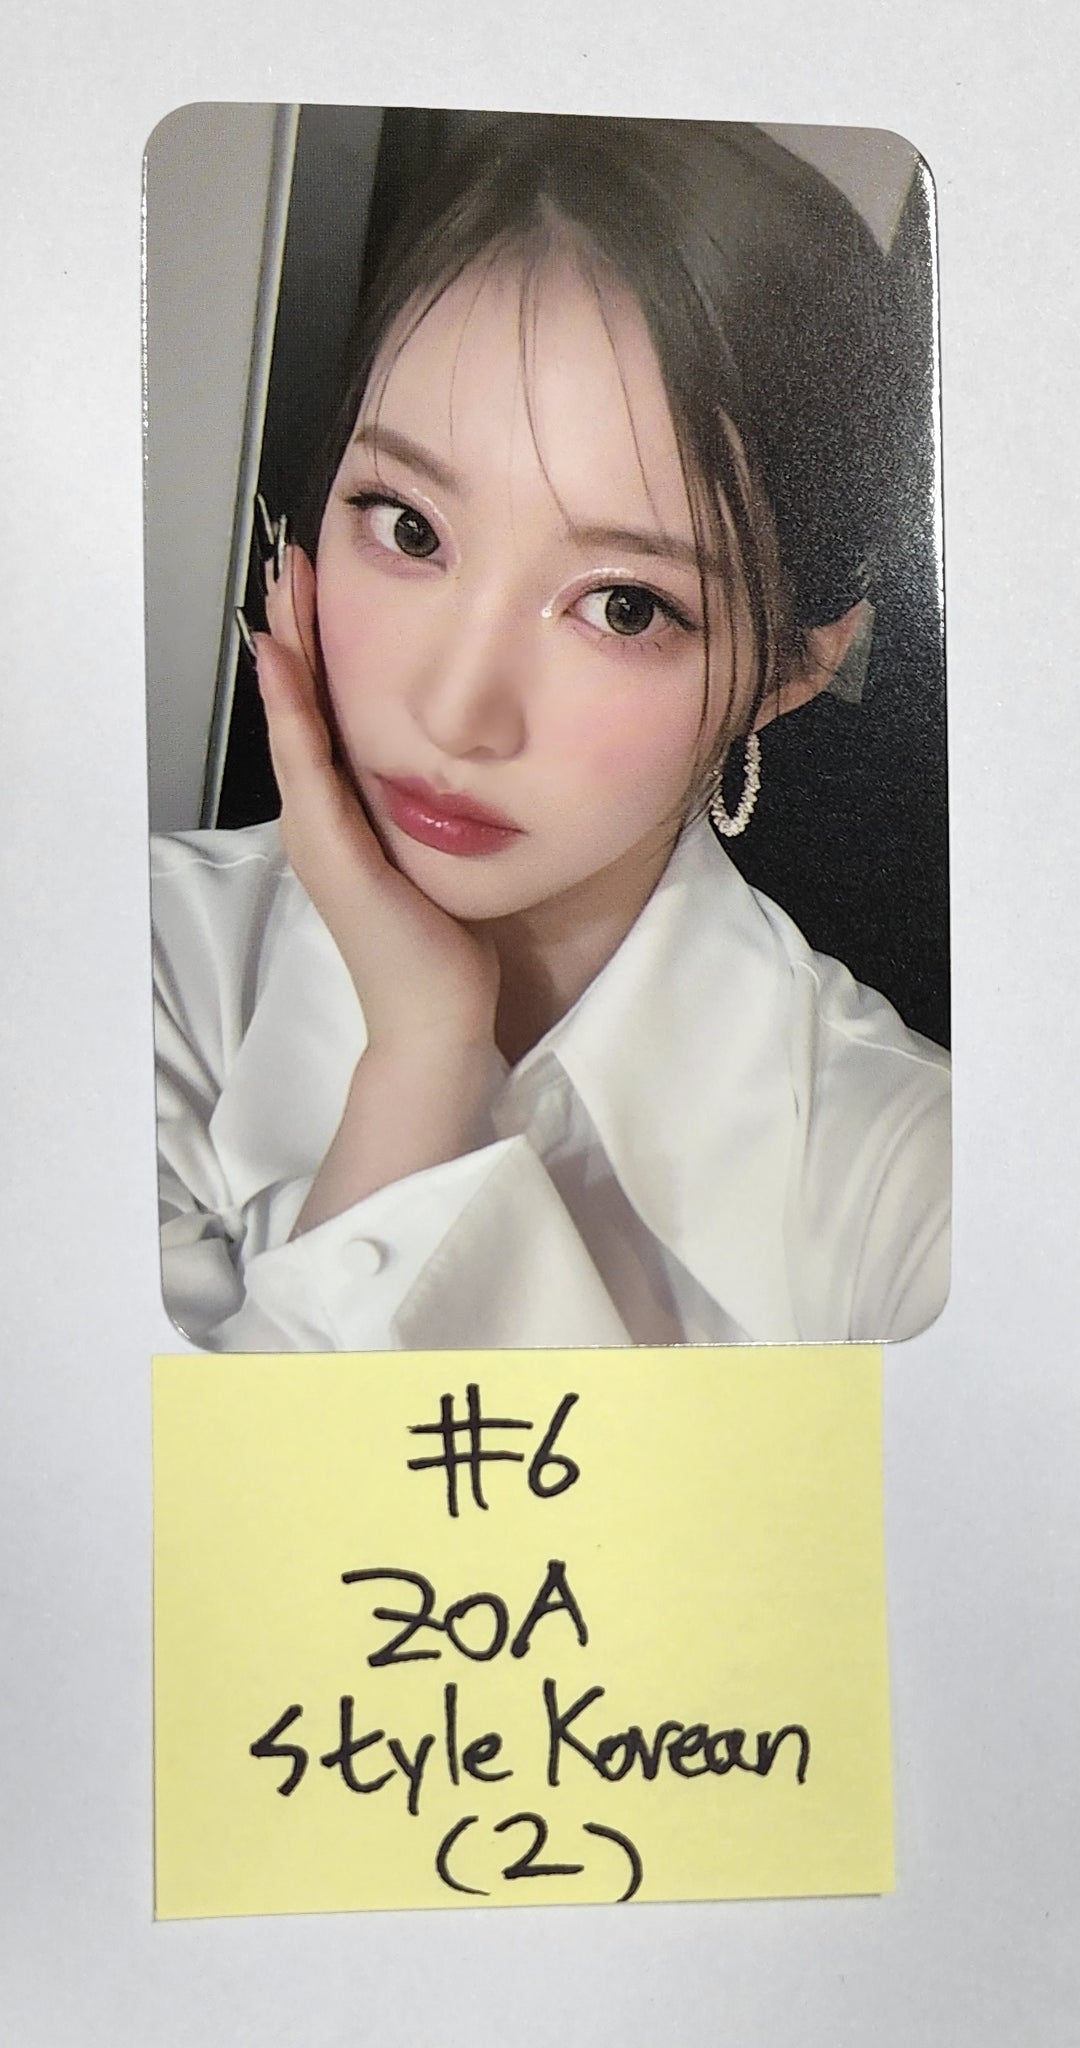 Weeekly "Play Game : AWAKE" - Style Korean Fansign Event Photocard